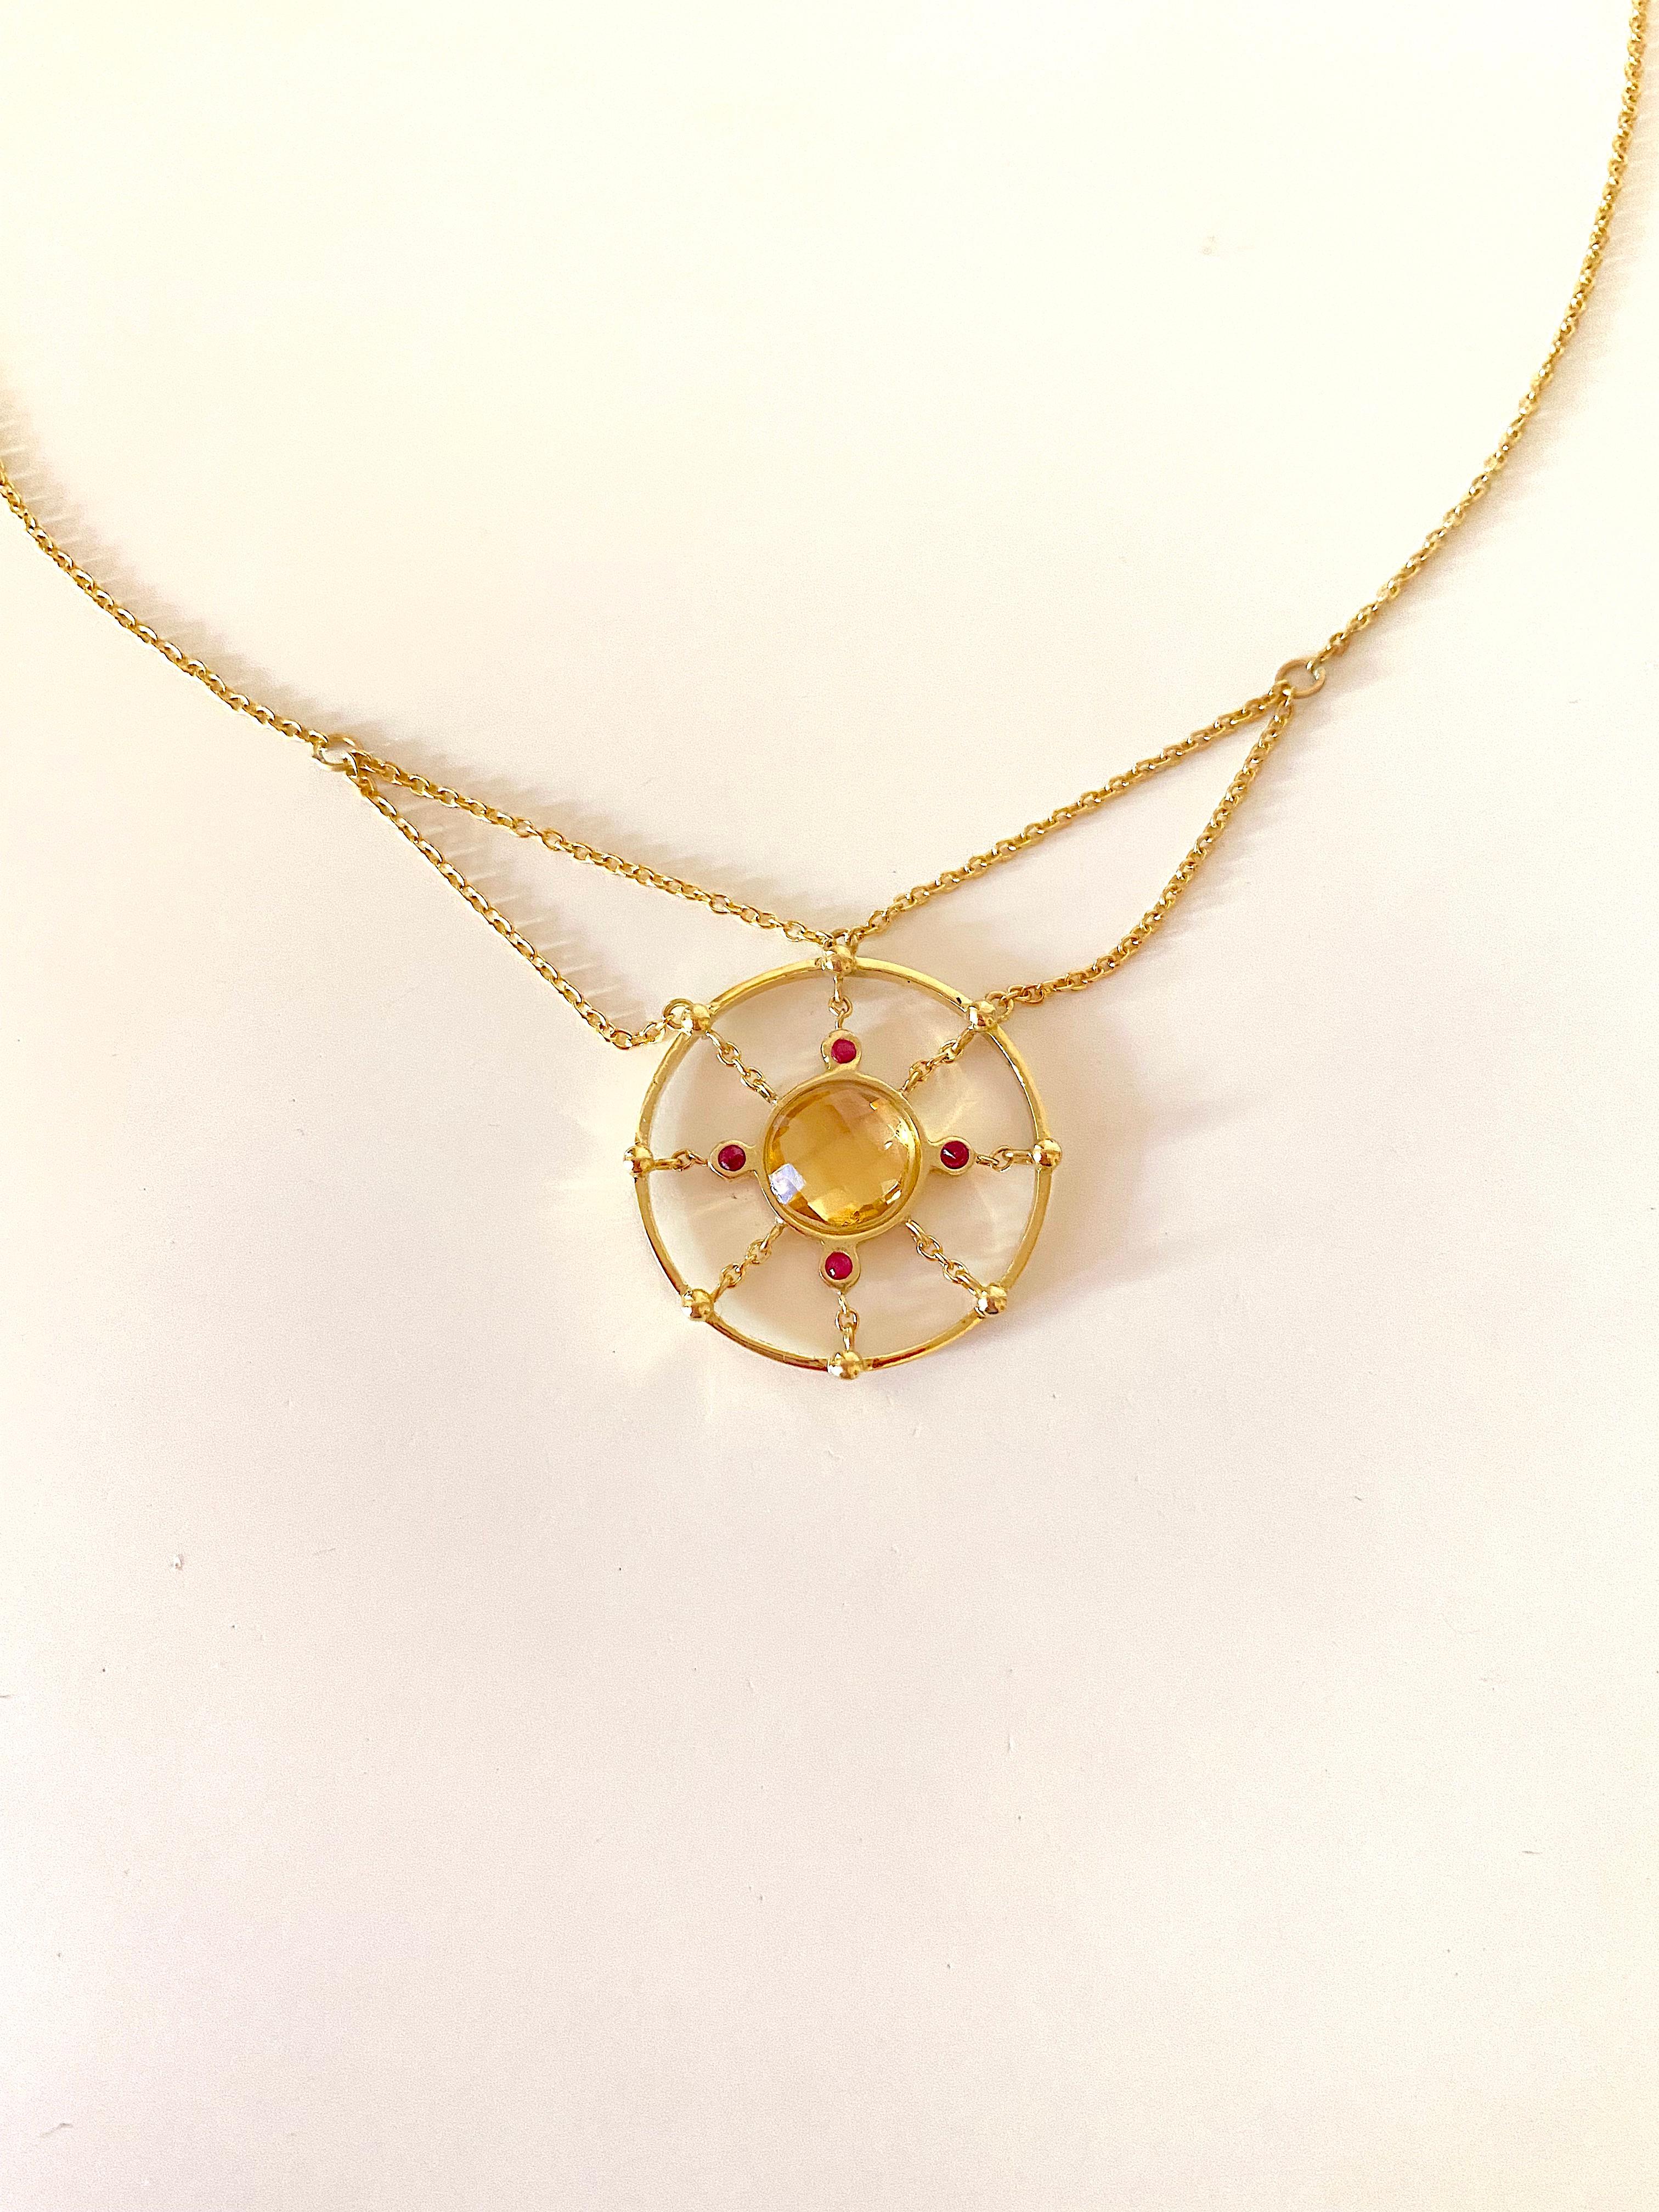 Handcrafted 18 Karats Yellow Gold Citrine Rubies Design Chain Pendant Necklace 
A sunny pendent on a chain necklace handcrafted in 18 karats yellow gold and embellished with a 4 rubies that balance the radiant citrine central stone.
The lenght of